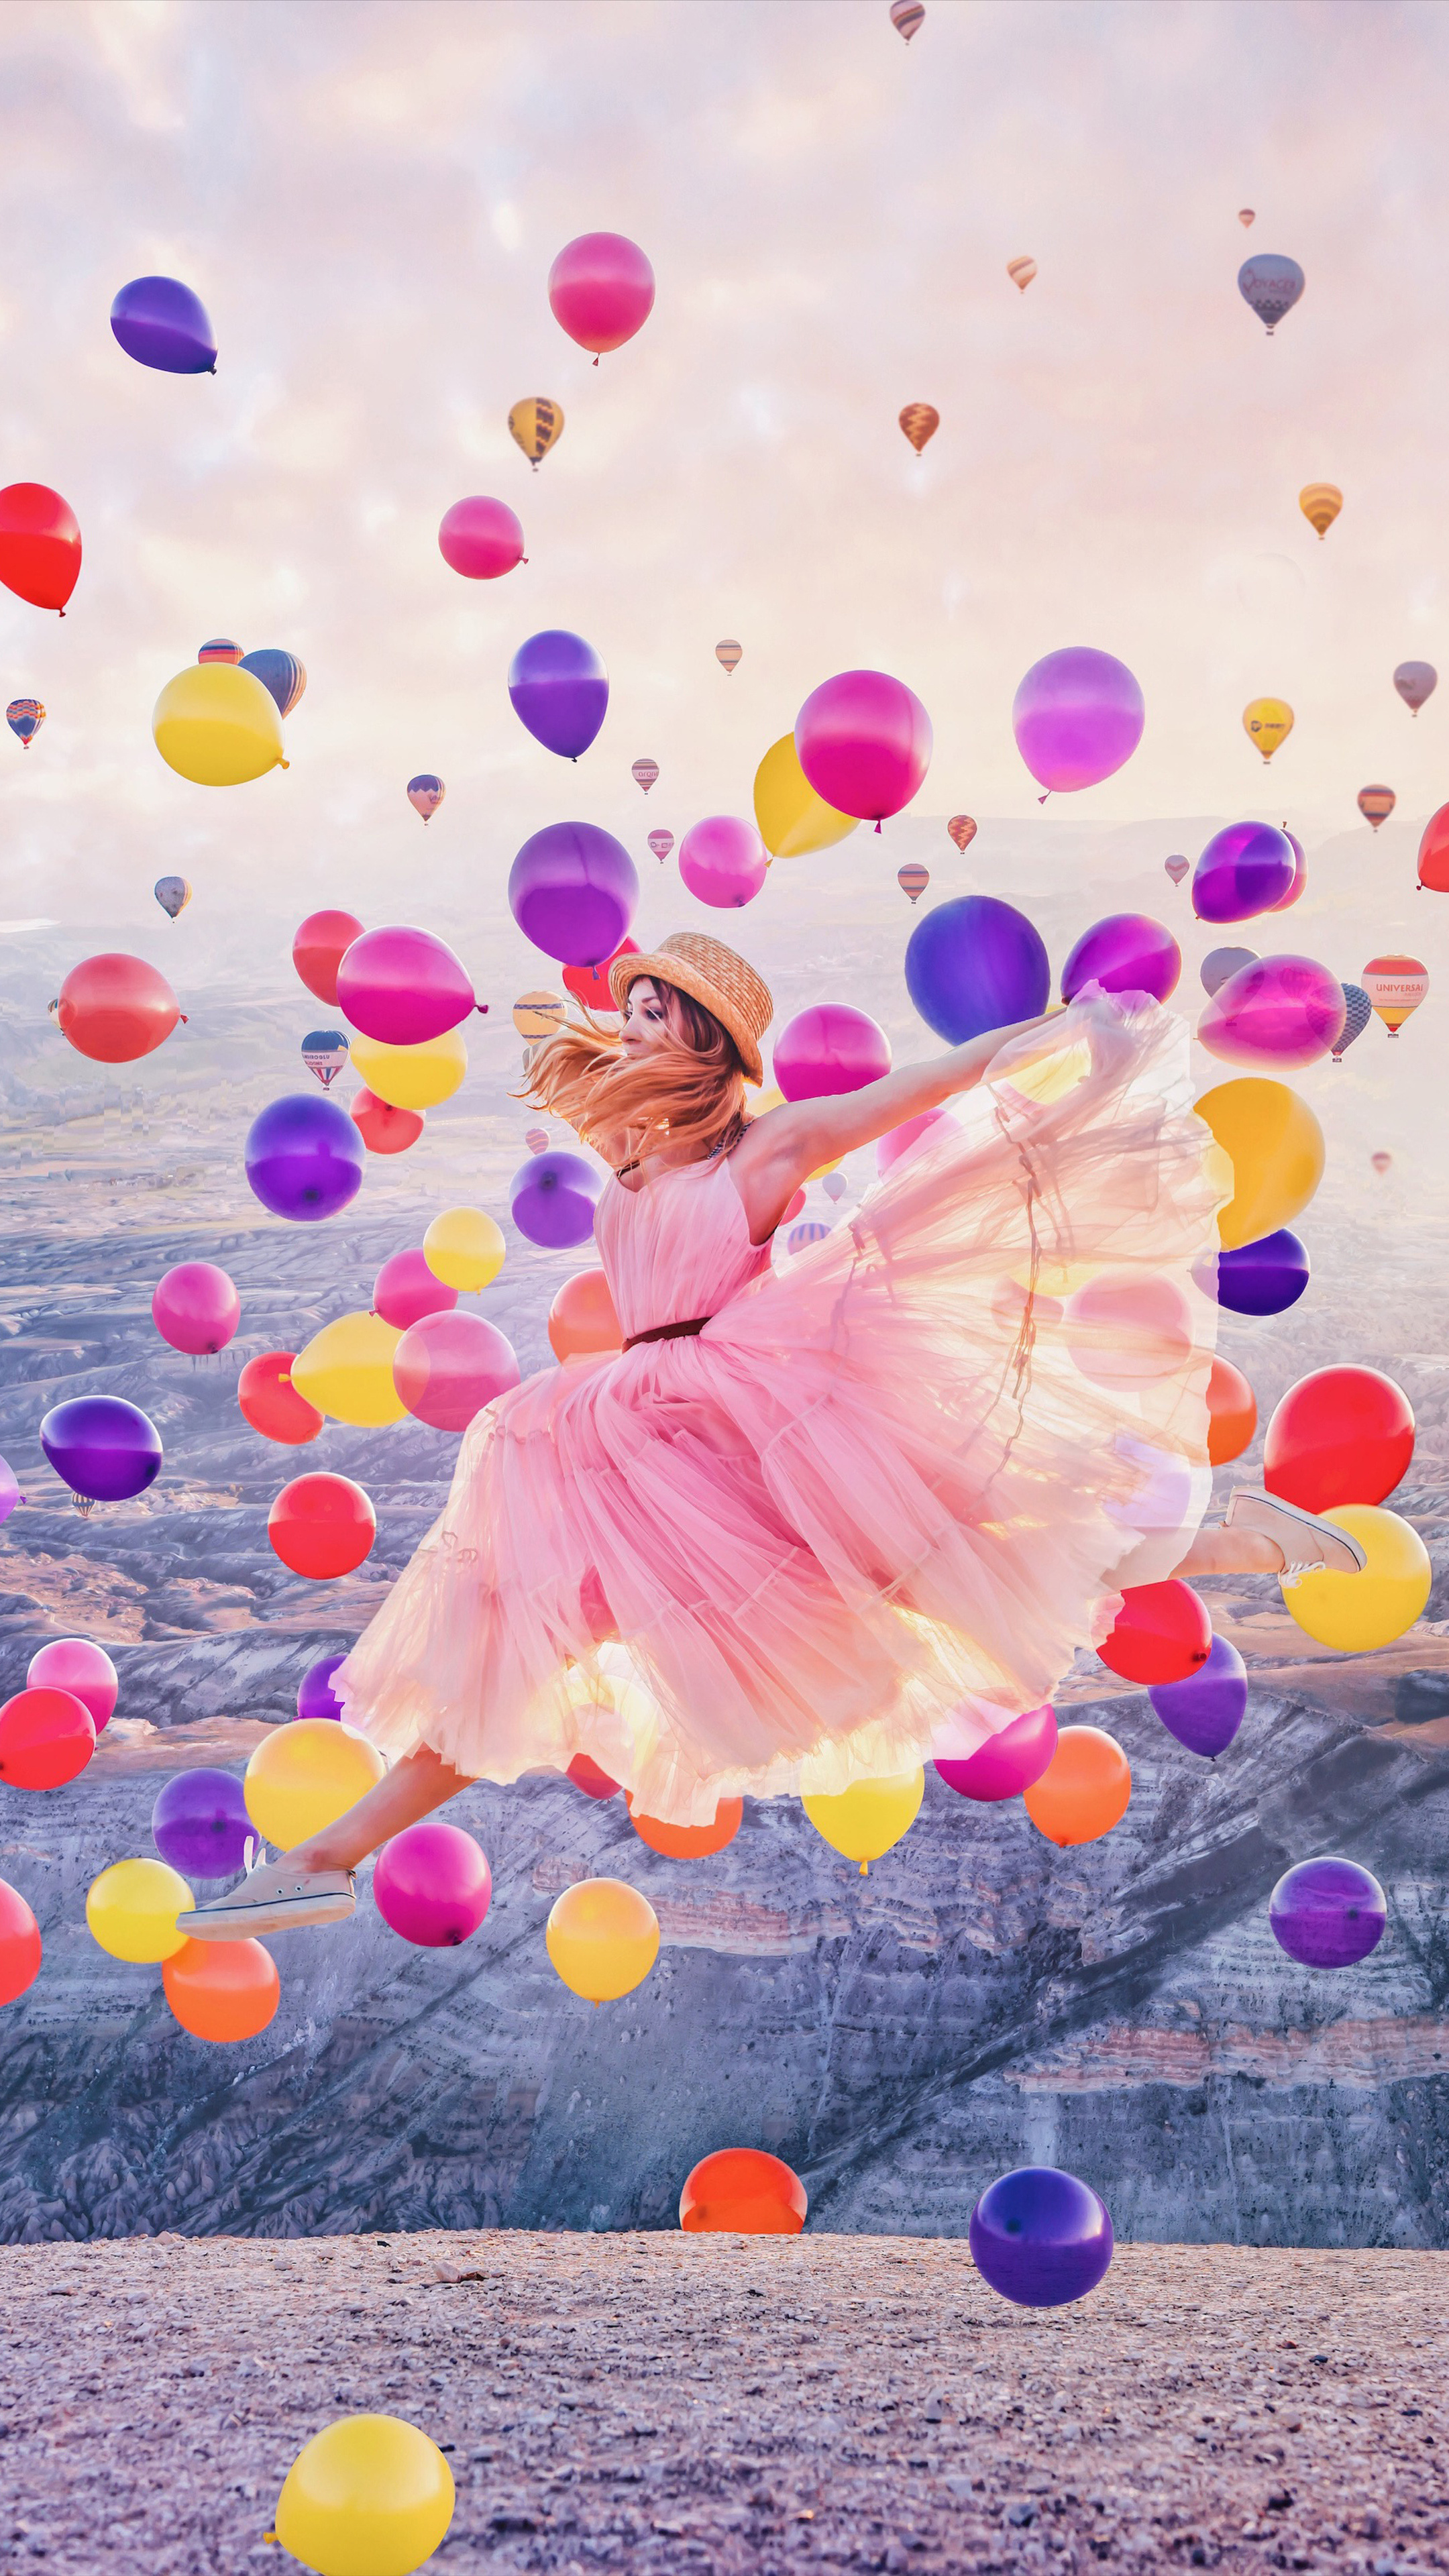 Jumping: Leaping in Mountains and Balloons. 2160x3840 4K Background.